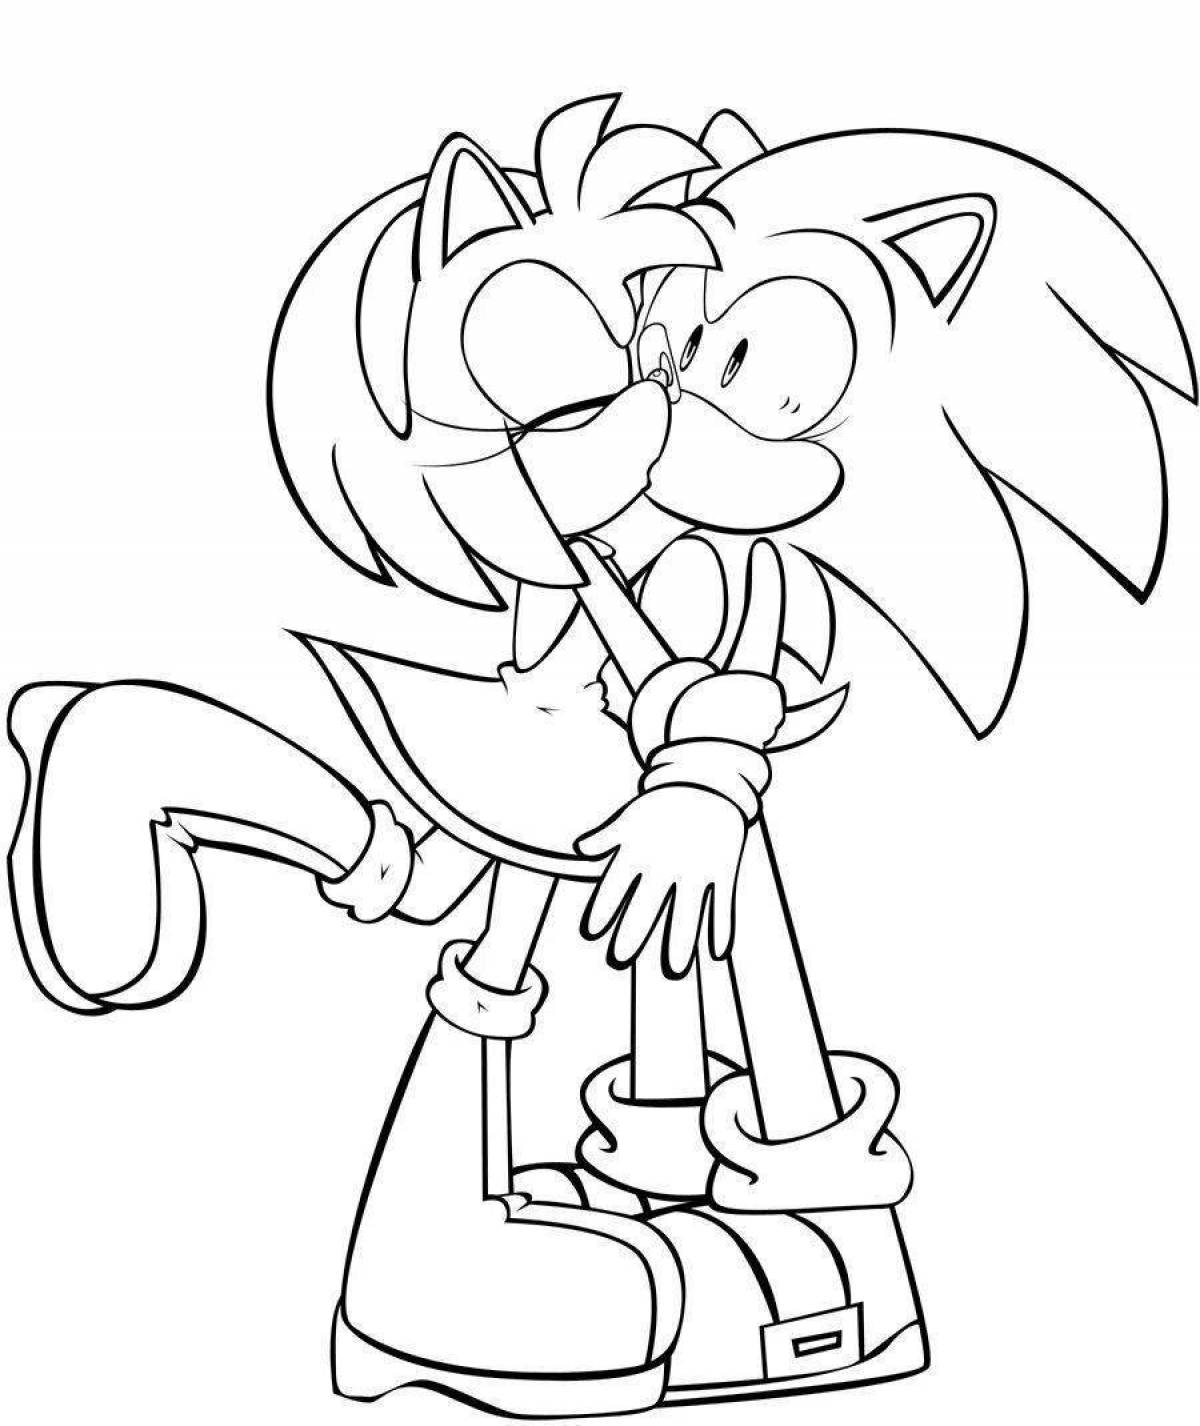 Cute sonic egze coloring page